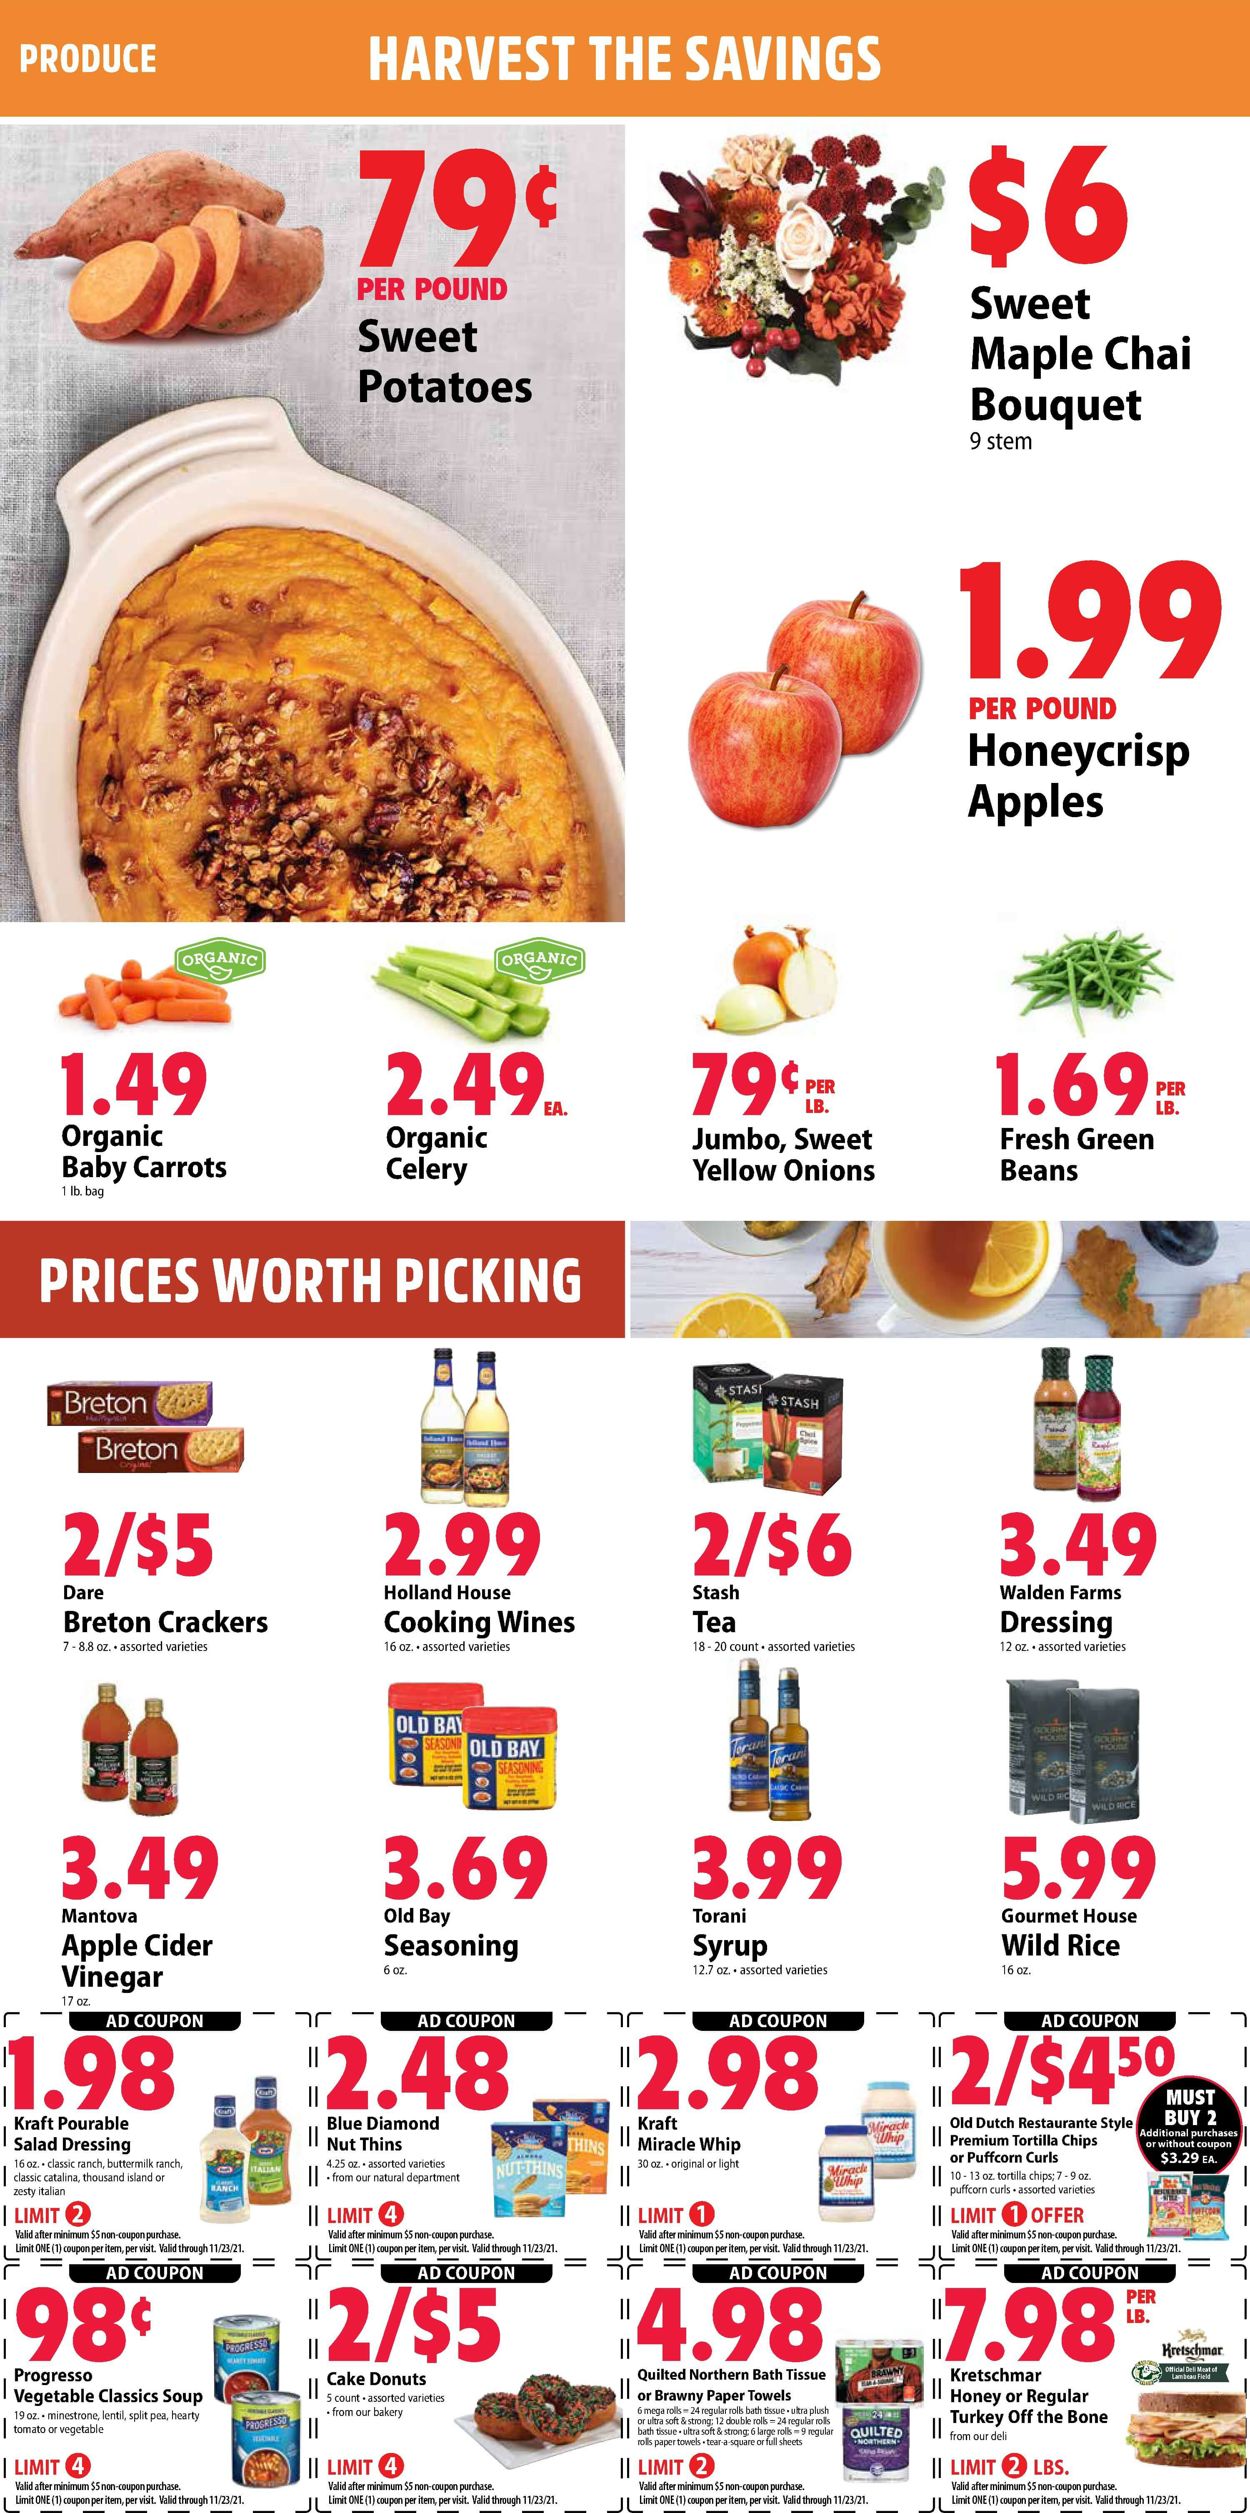 Festival Foods HOLIDAY 2021 Weekly Ad Circular - valid 11/17-11/23/2021 (Page 8)